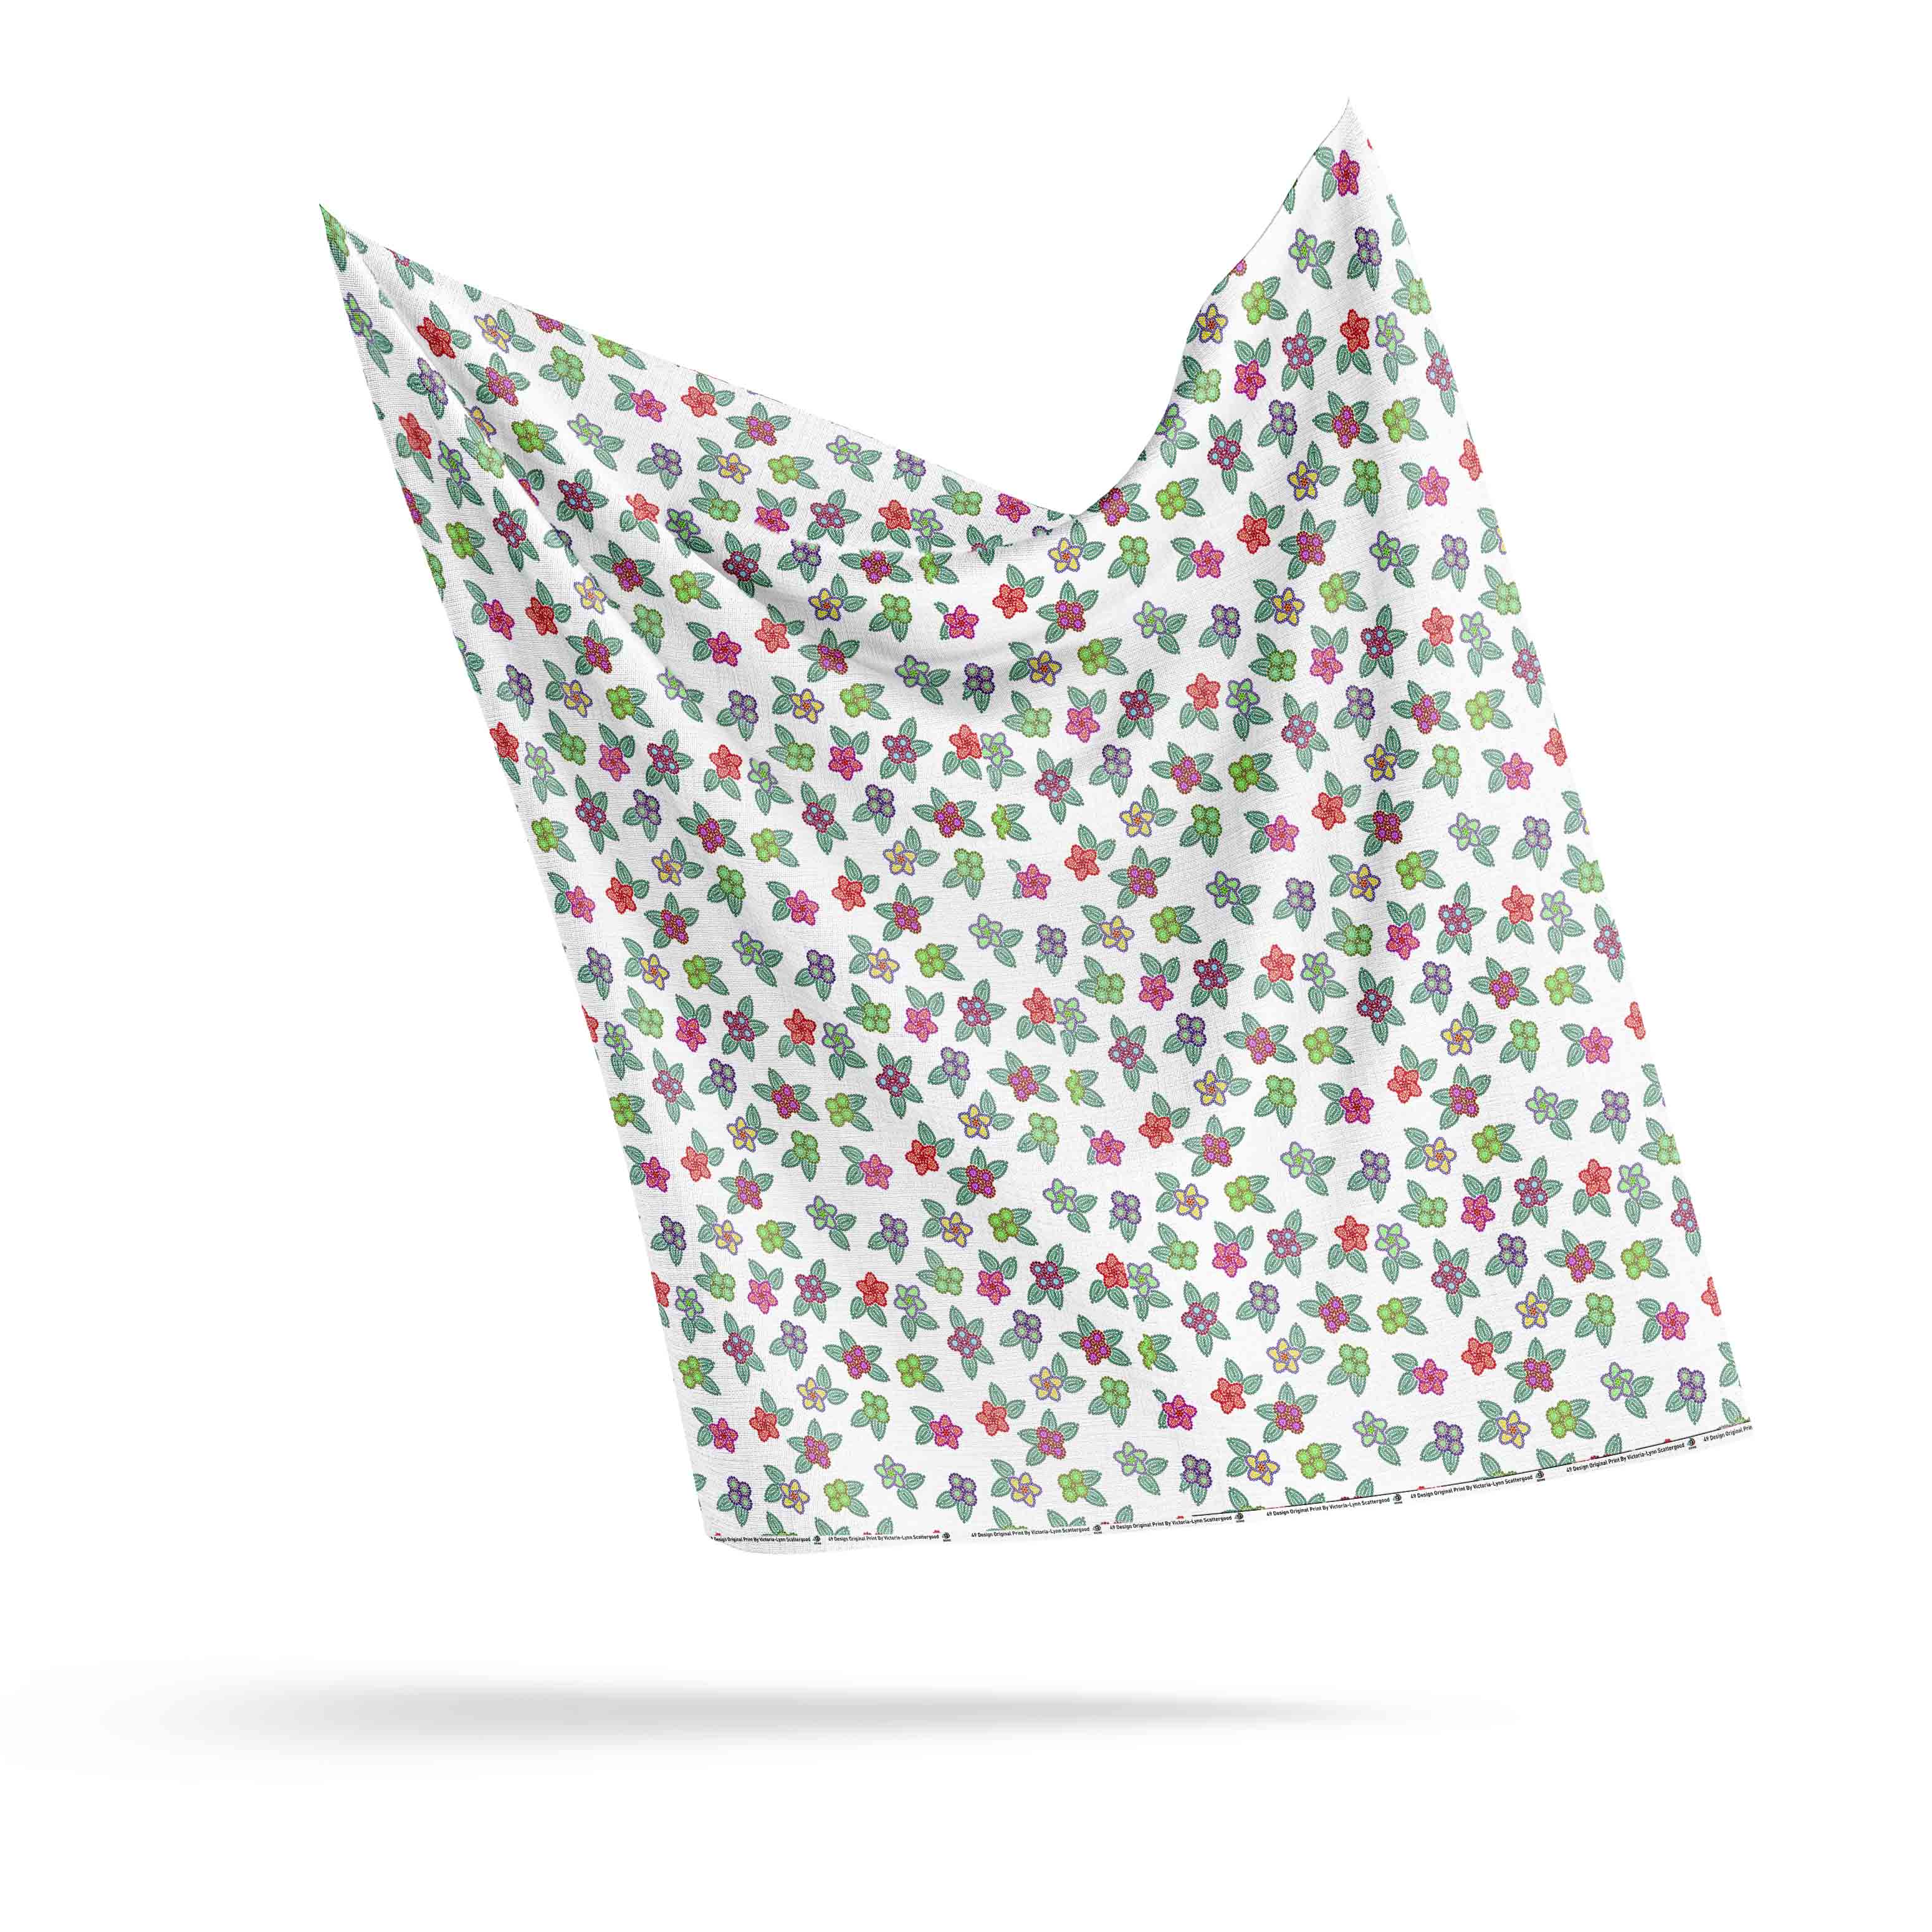 Berry Flowers White Cotton Poplin Fabric By the Yard